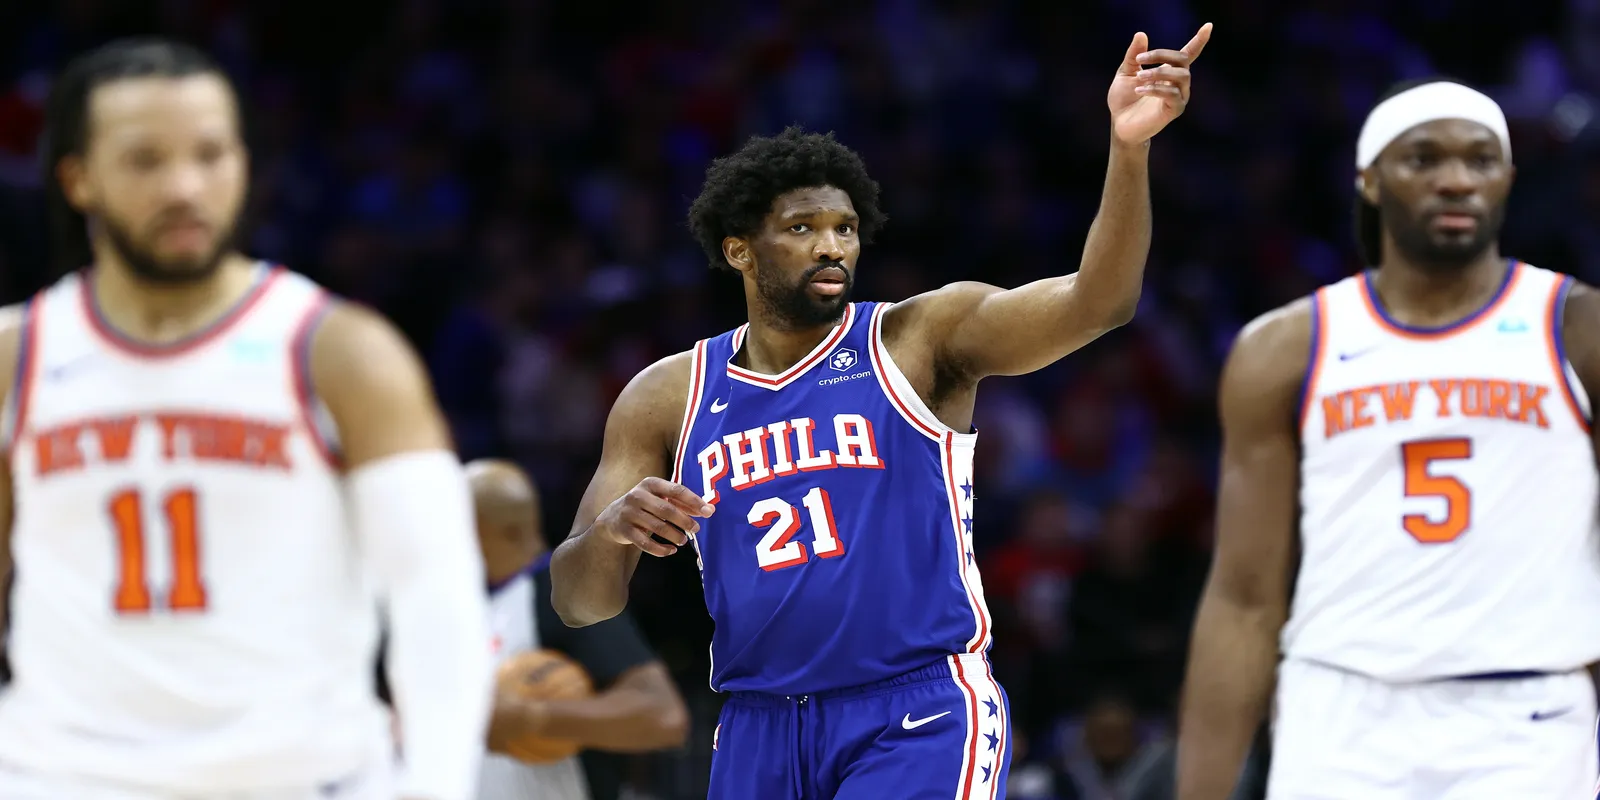 Knicks vs. 76ers: Can New York Bounce Back or Will Philly Close it Out?